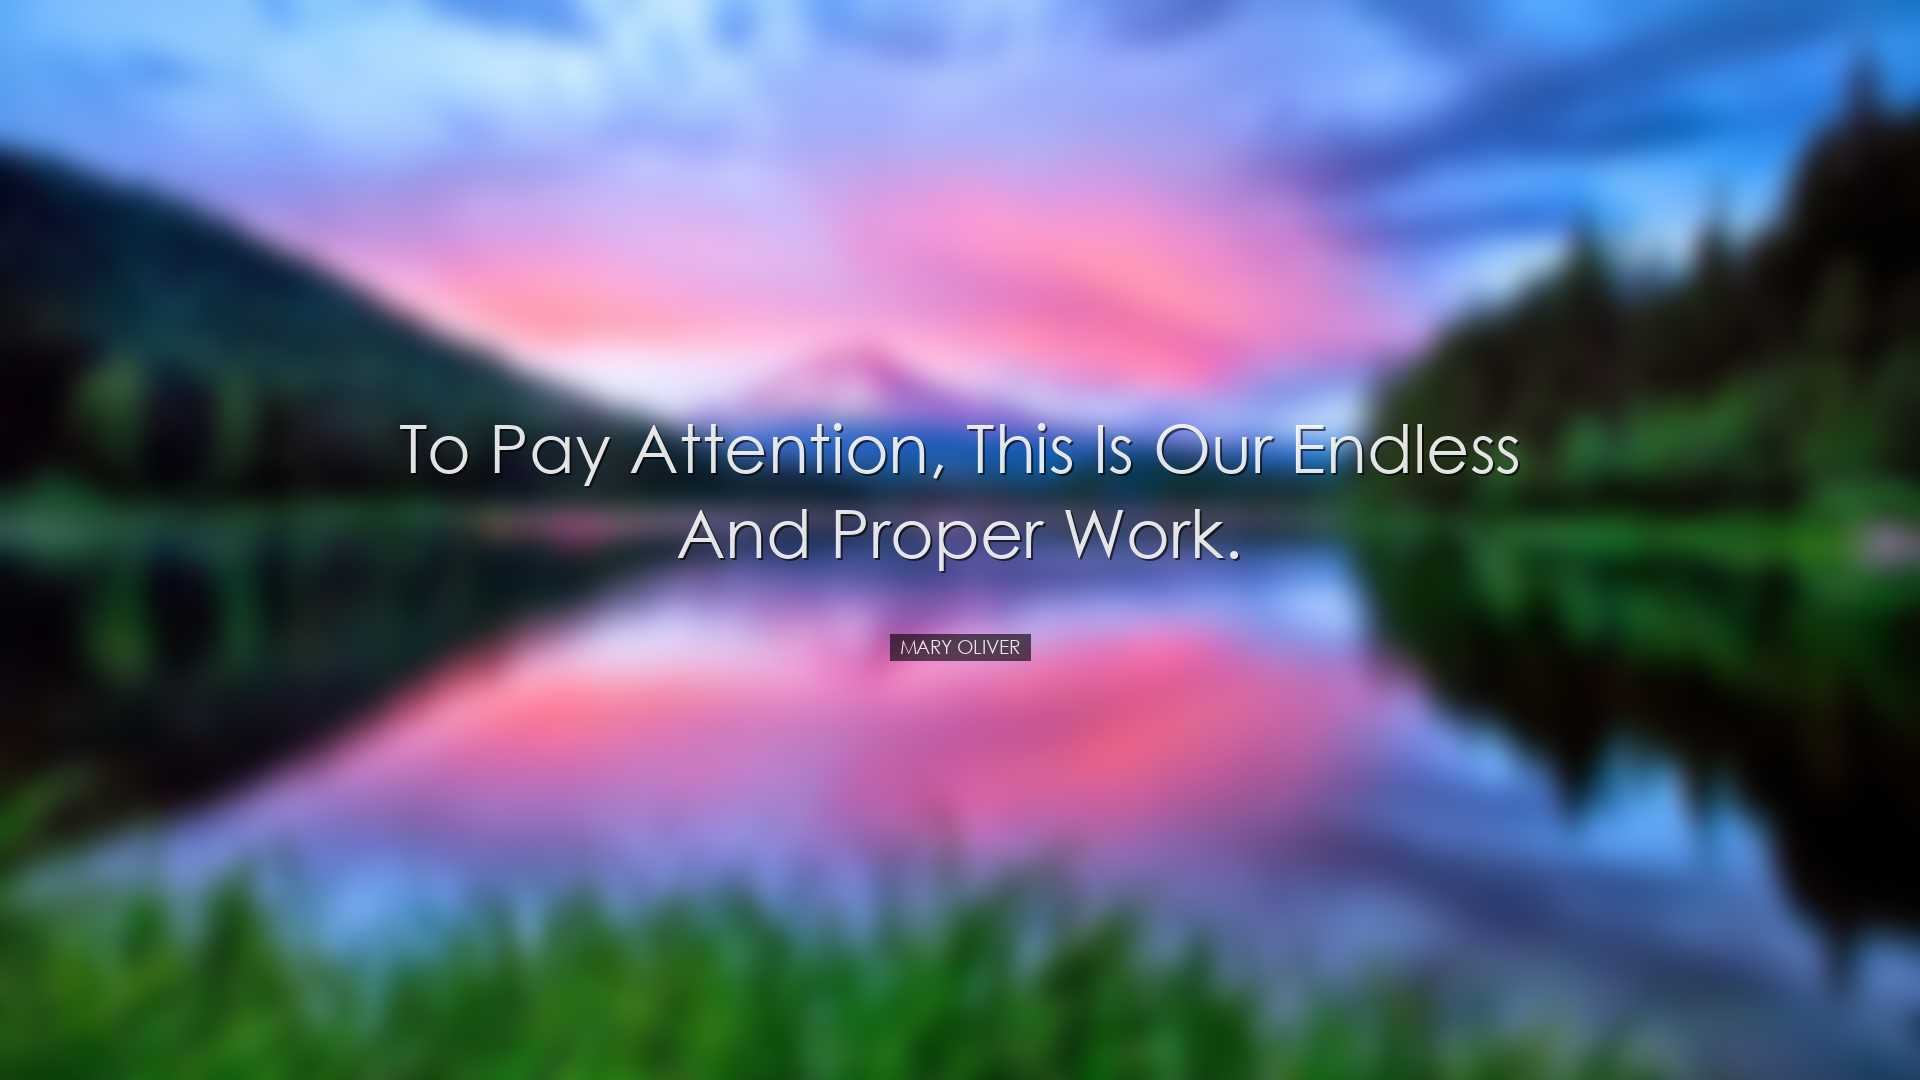 To pay attention, this is our endless and proper work. - Mary Oliv